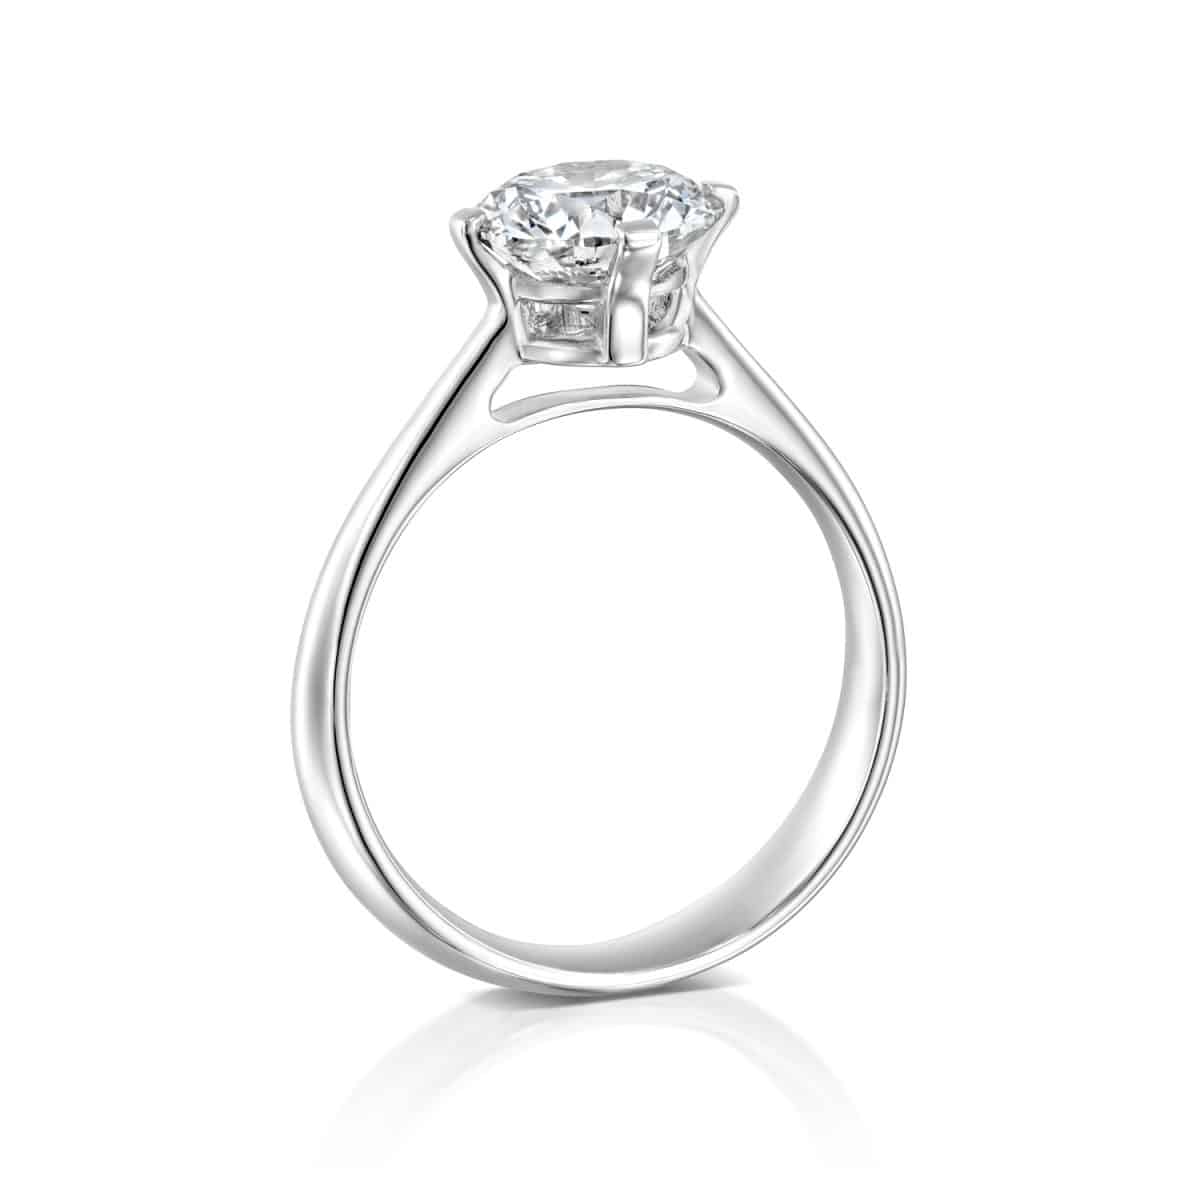 "Mary" - Solitaire Lab Grown Diamond Engagement Ring 1.51ct. - standing